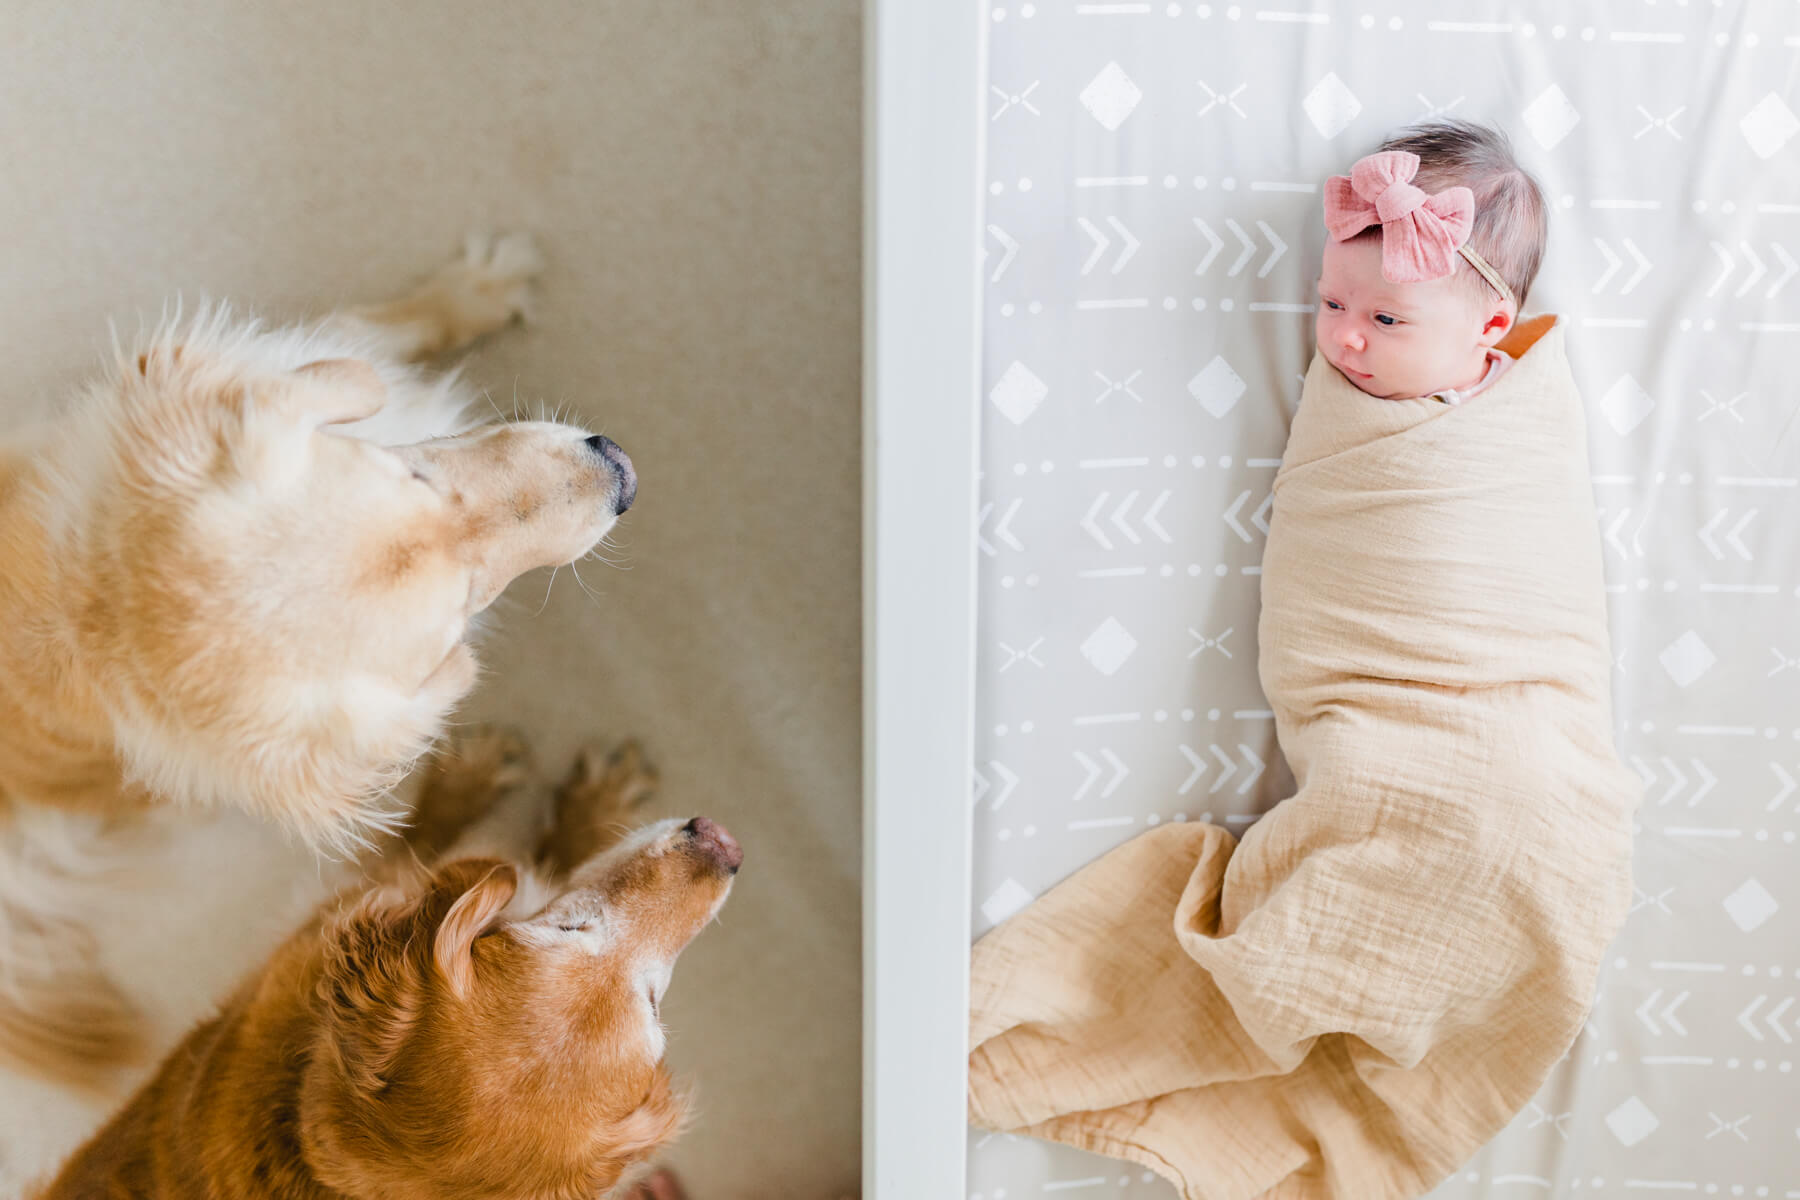 Two golden retrievers look on as a newborn girl lays swaddled in her crib looking at the dogs nightingale midwifery